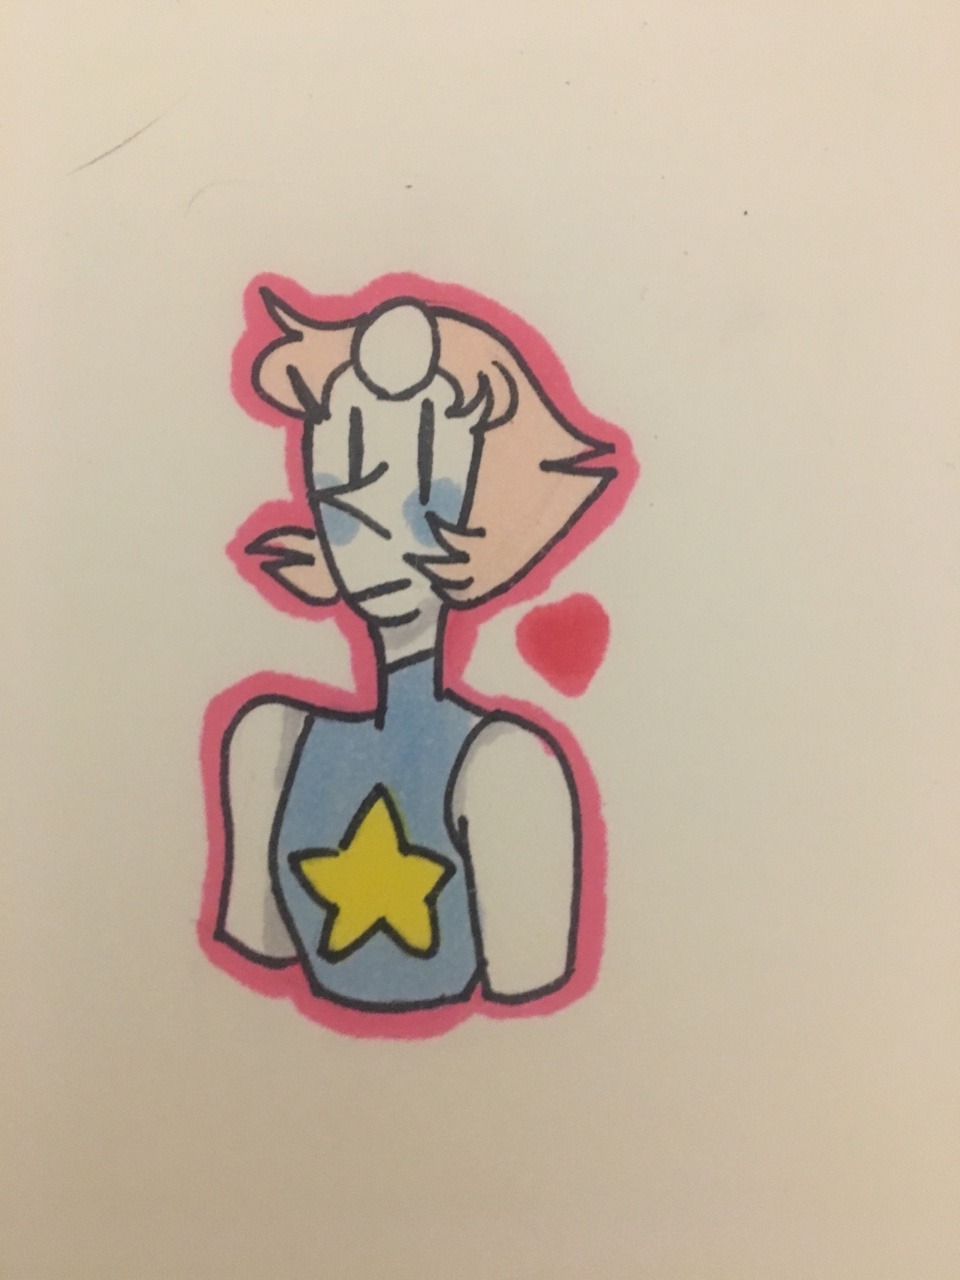 Hey news flash I love pearl. This was a small doodle that I decided to finish. The hearts sloppy but I don’t really care